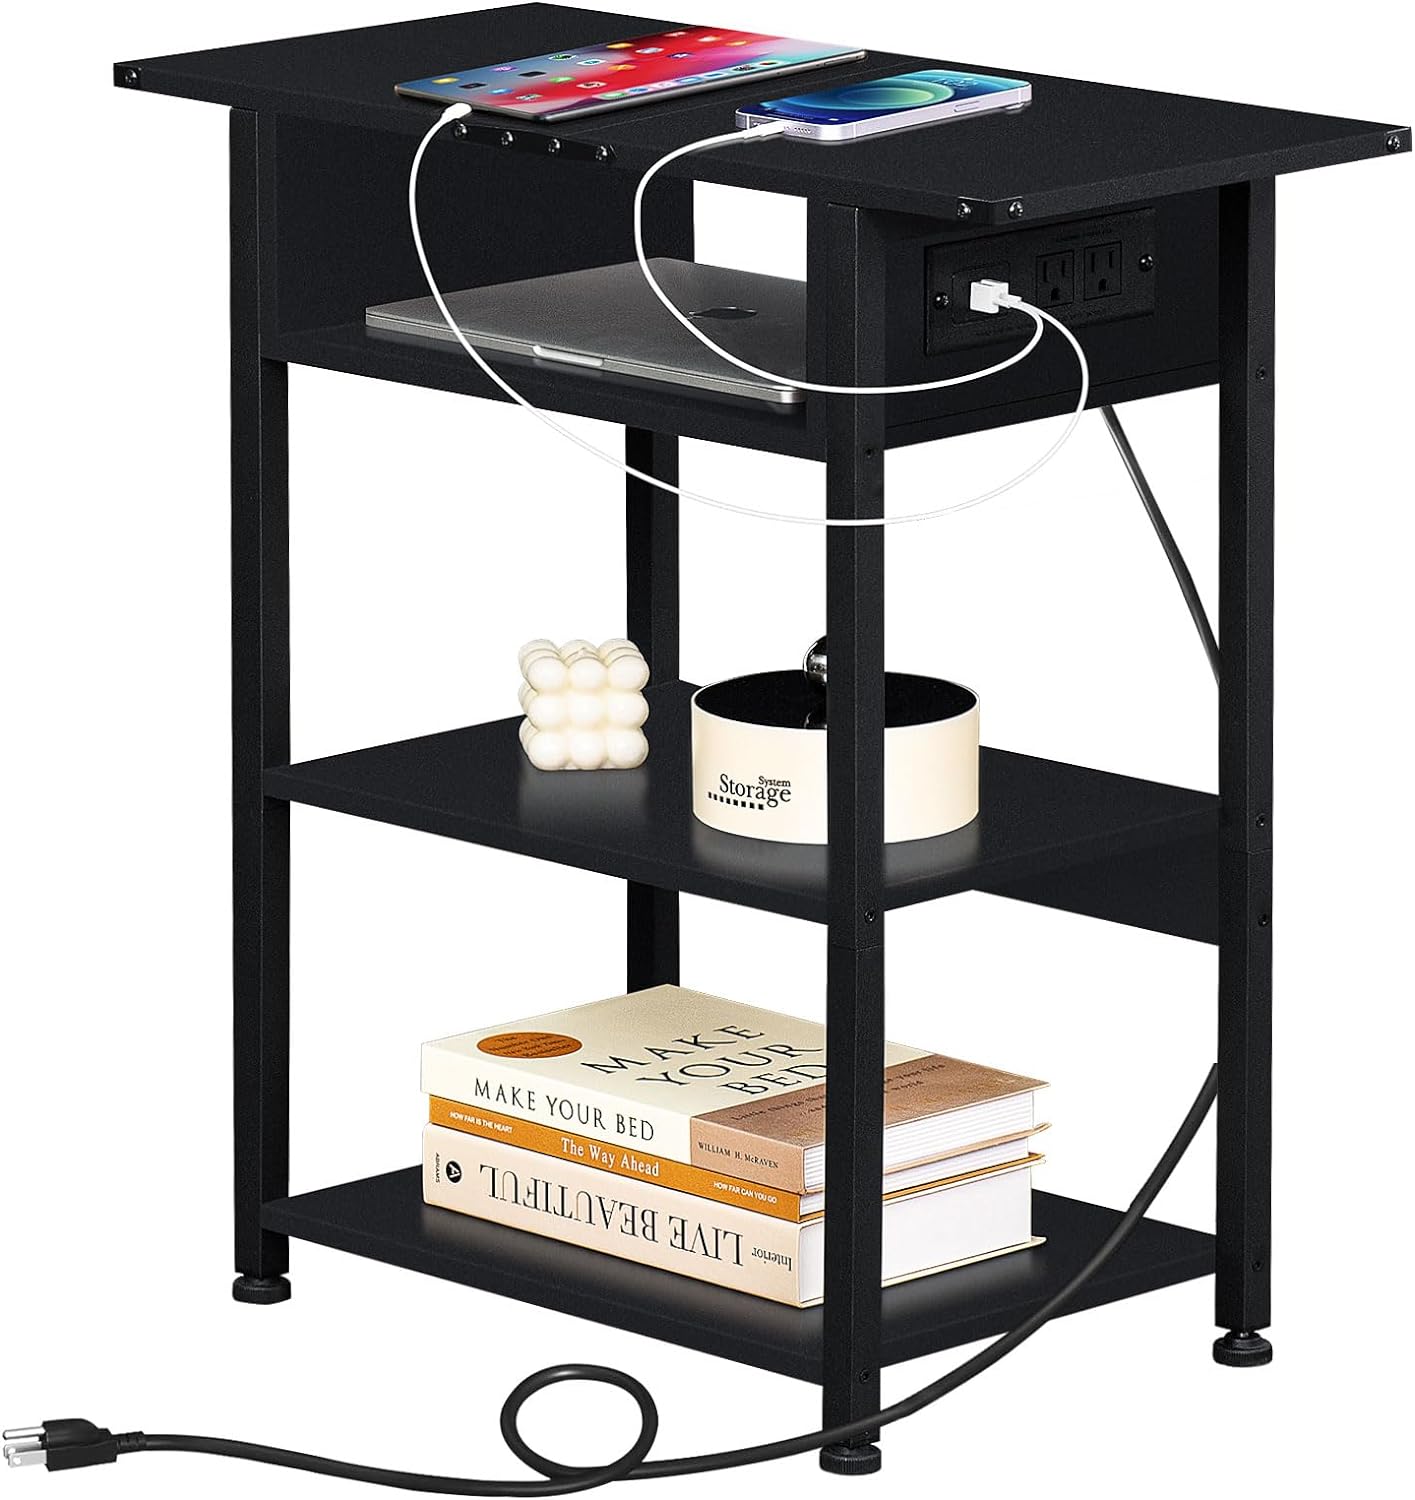 Lerliuo Side Table with Charging StationNarrow End Table with USB Ports and Outlets,Black Skinny Nightstand with Open Storage Shelf for Small SpaceSlim Sofa Bedside Table for Living Room Bedroom